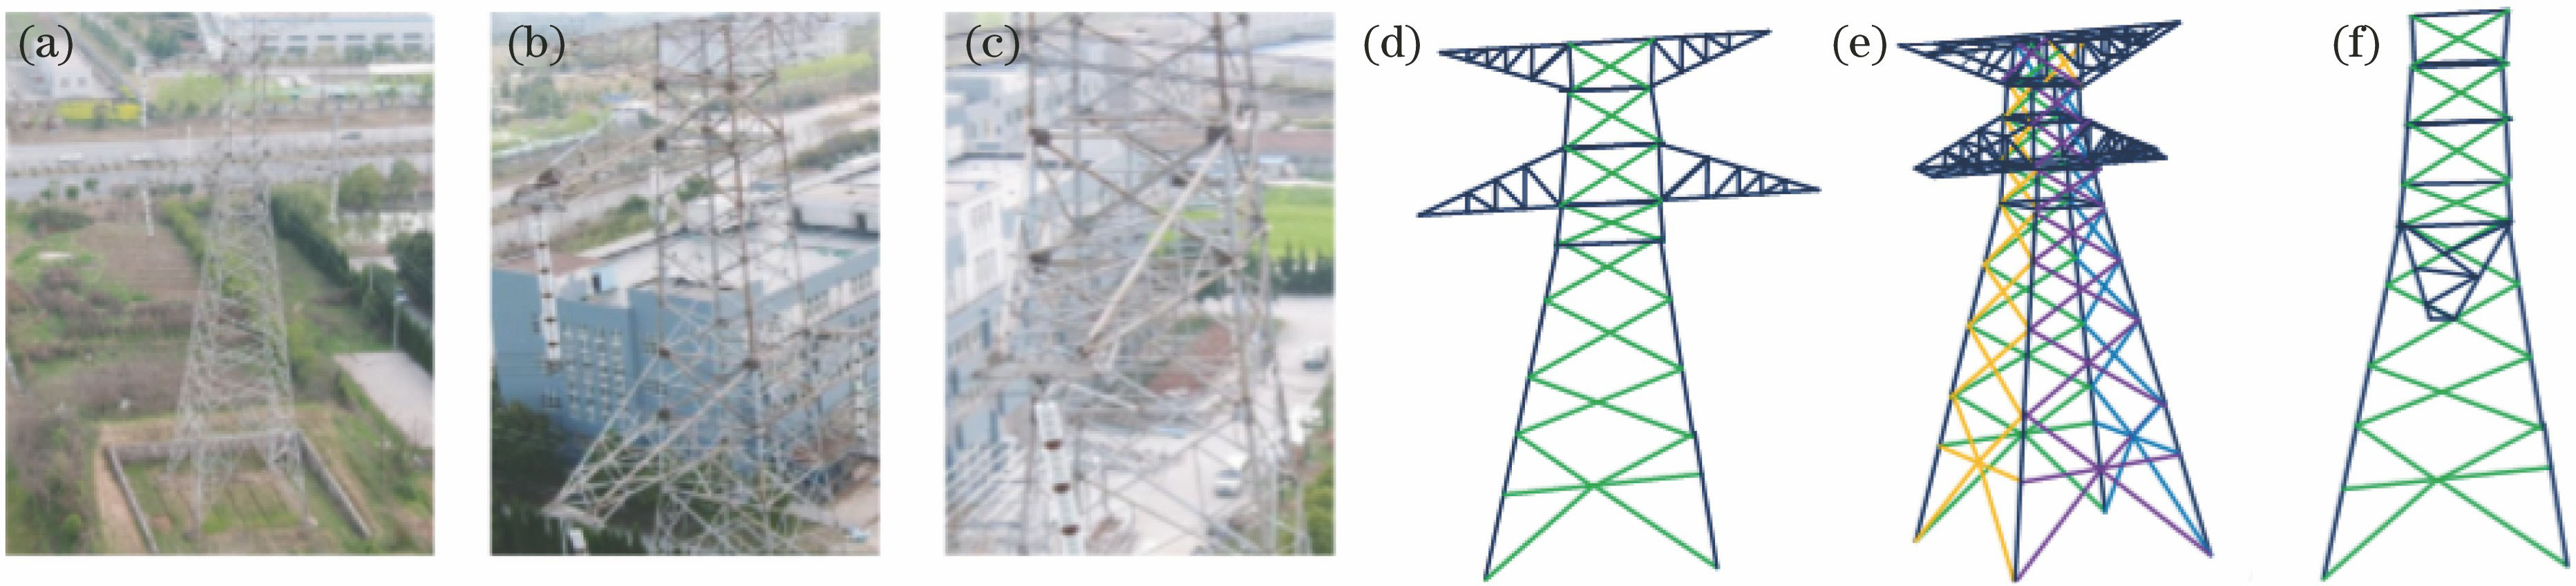 Aerial images and diagrams of towers. (a) Front image; (b) front side image; (c) side image; (d) front view diagram; (e) front side view diagram; (f) side view diagram